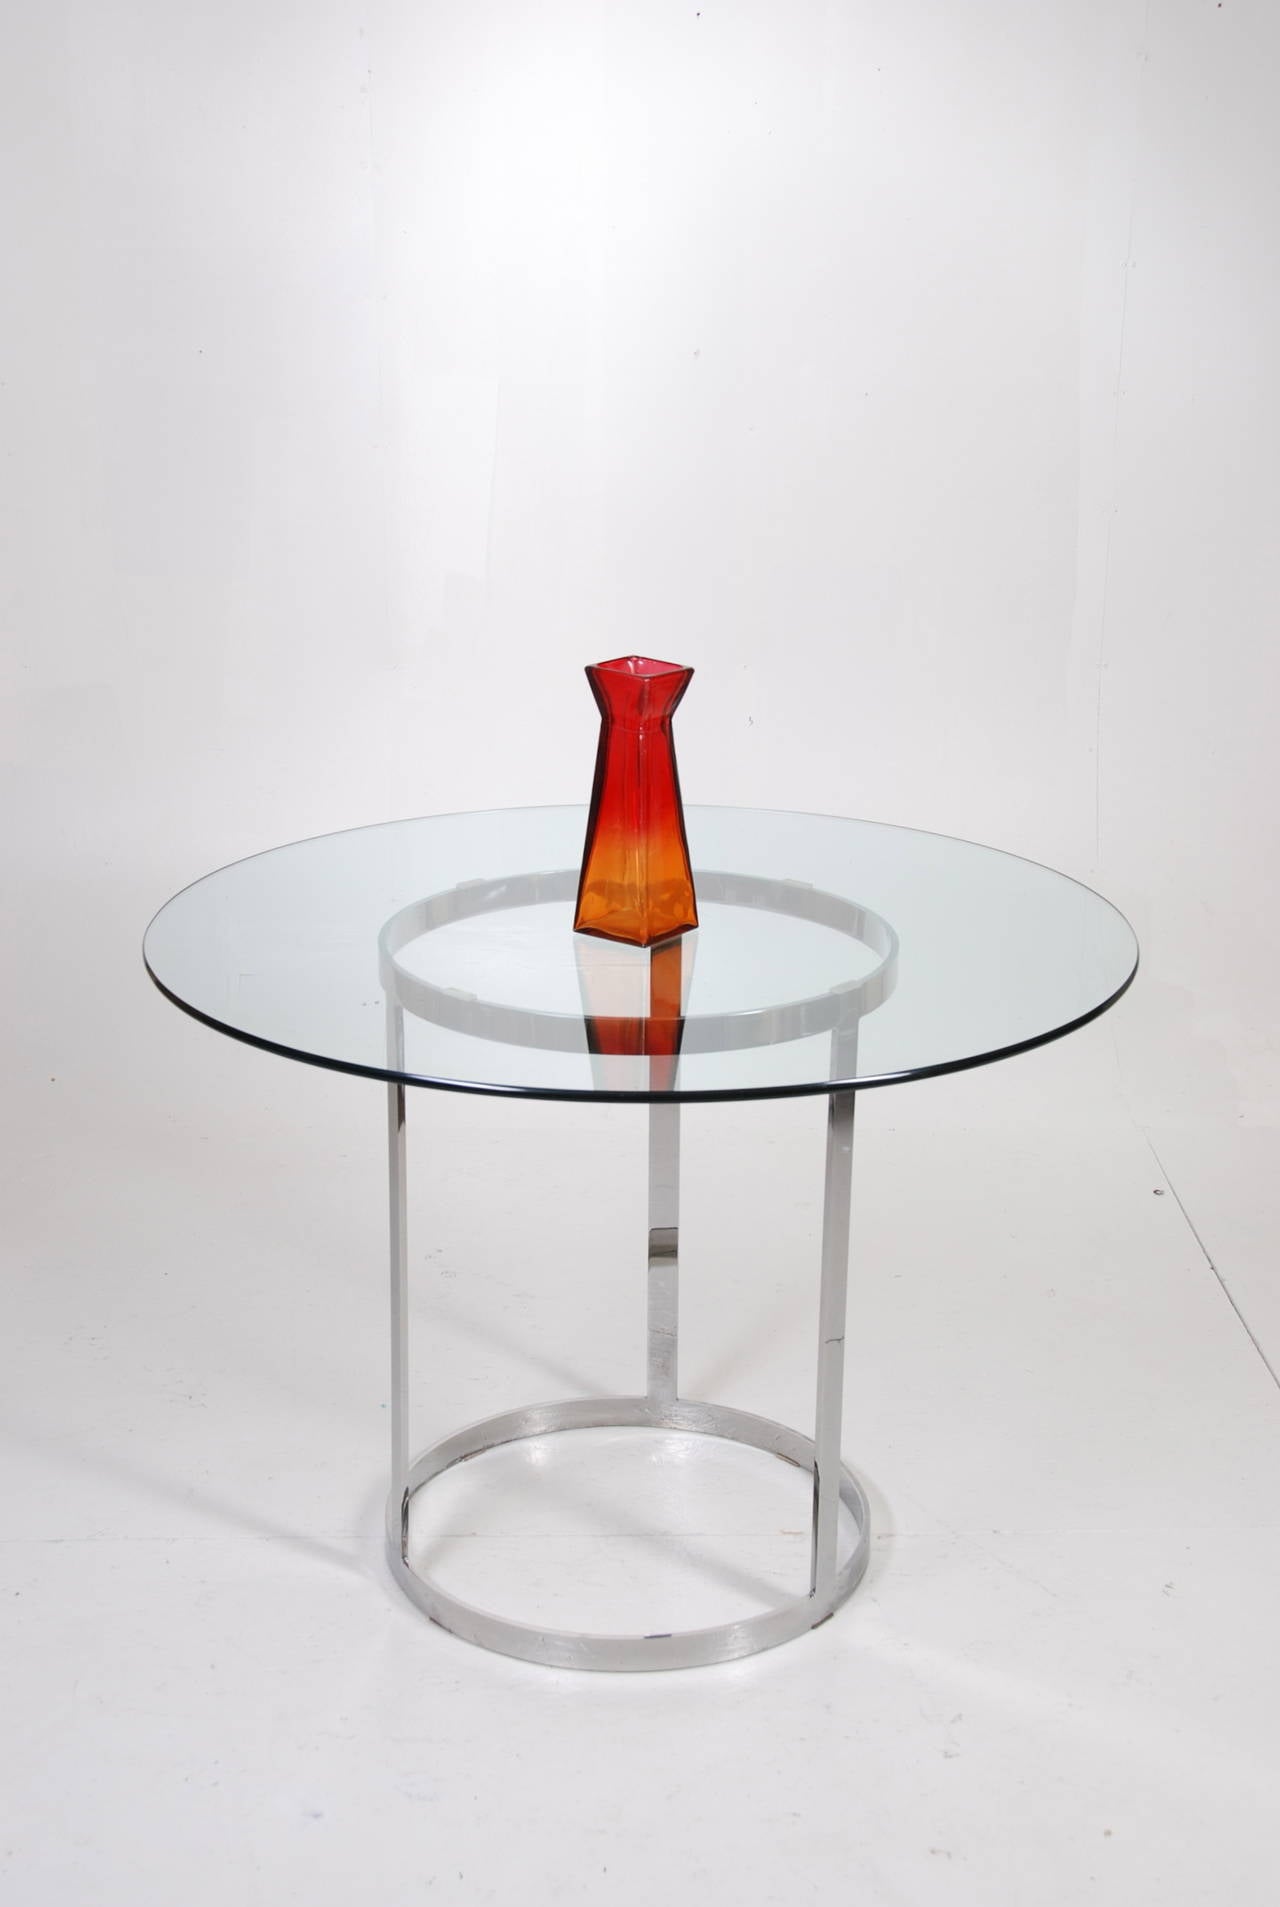 Late 20th Century Milo Baughman Round Glass and Chrome Dining Table